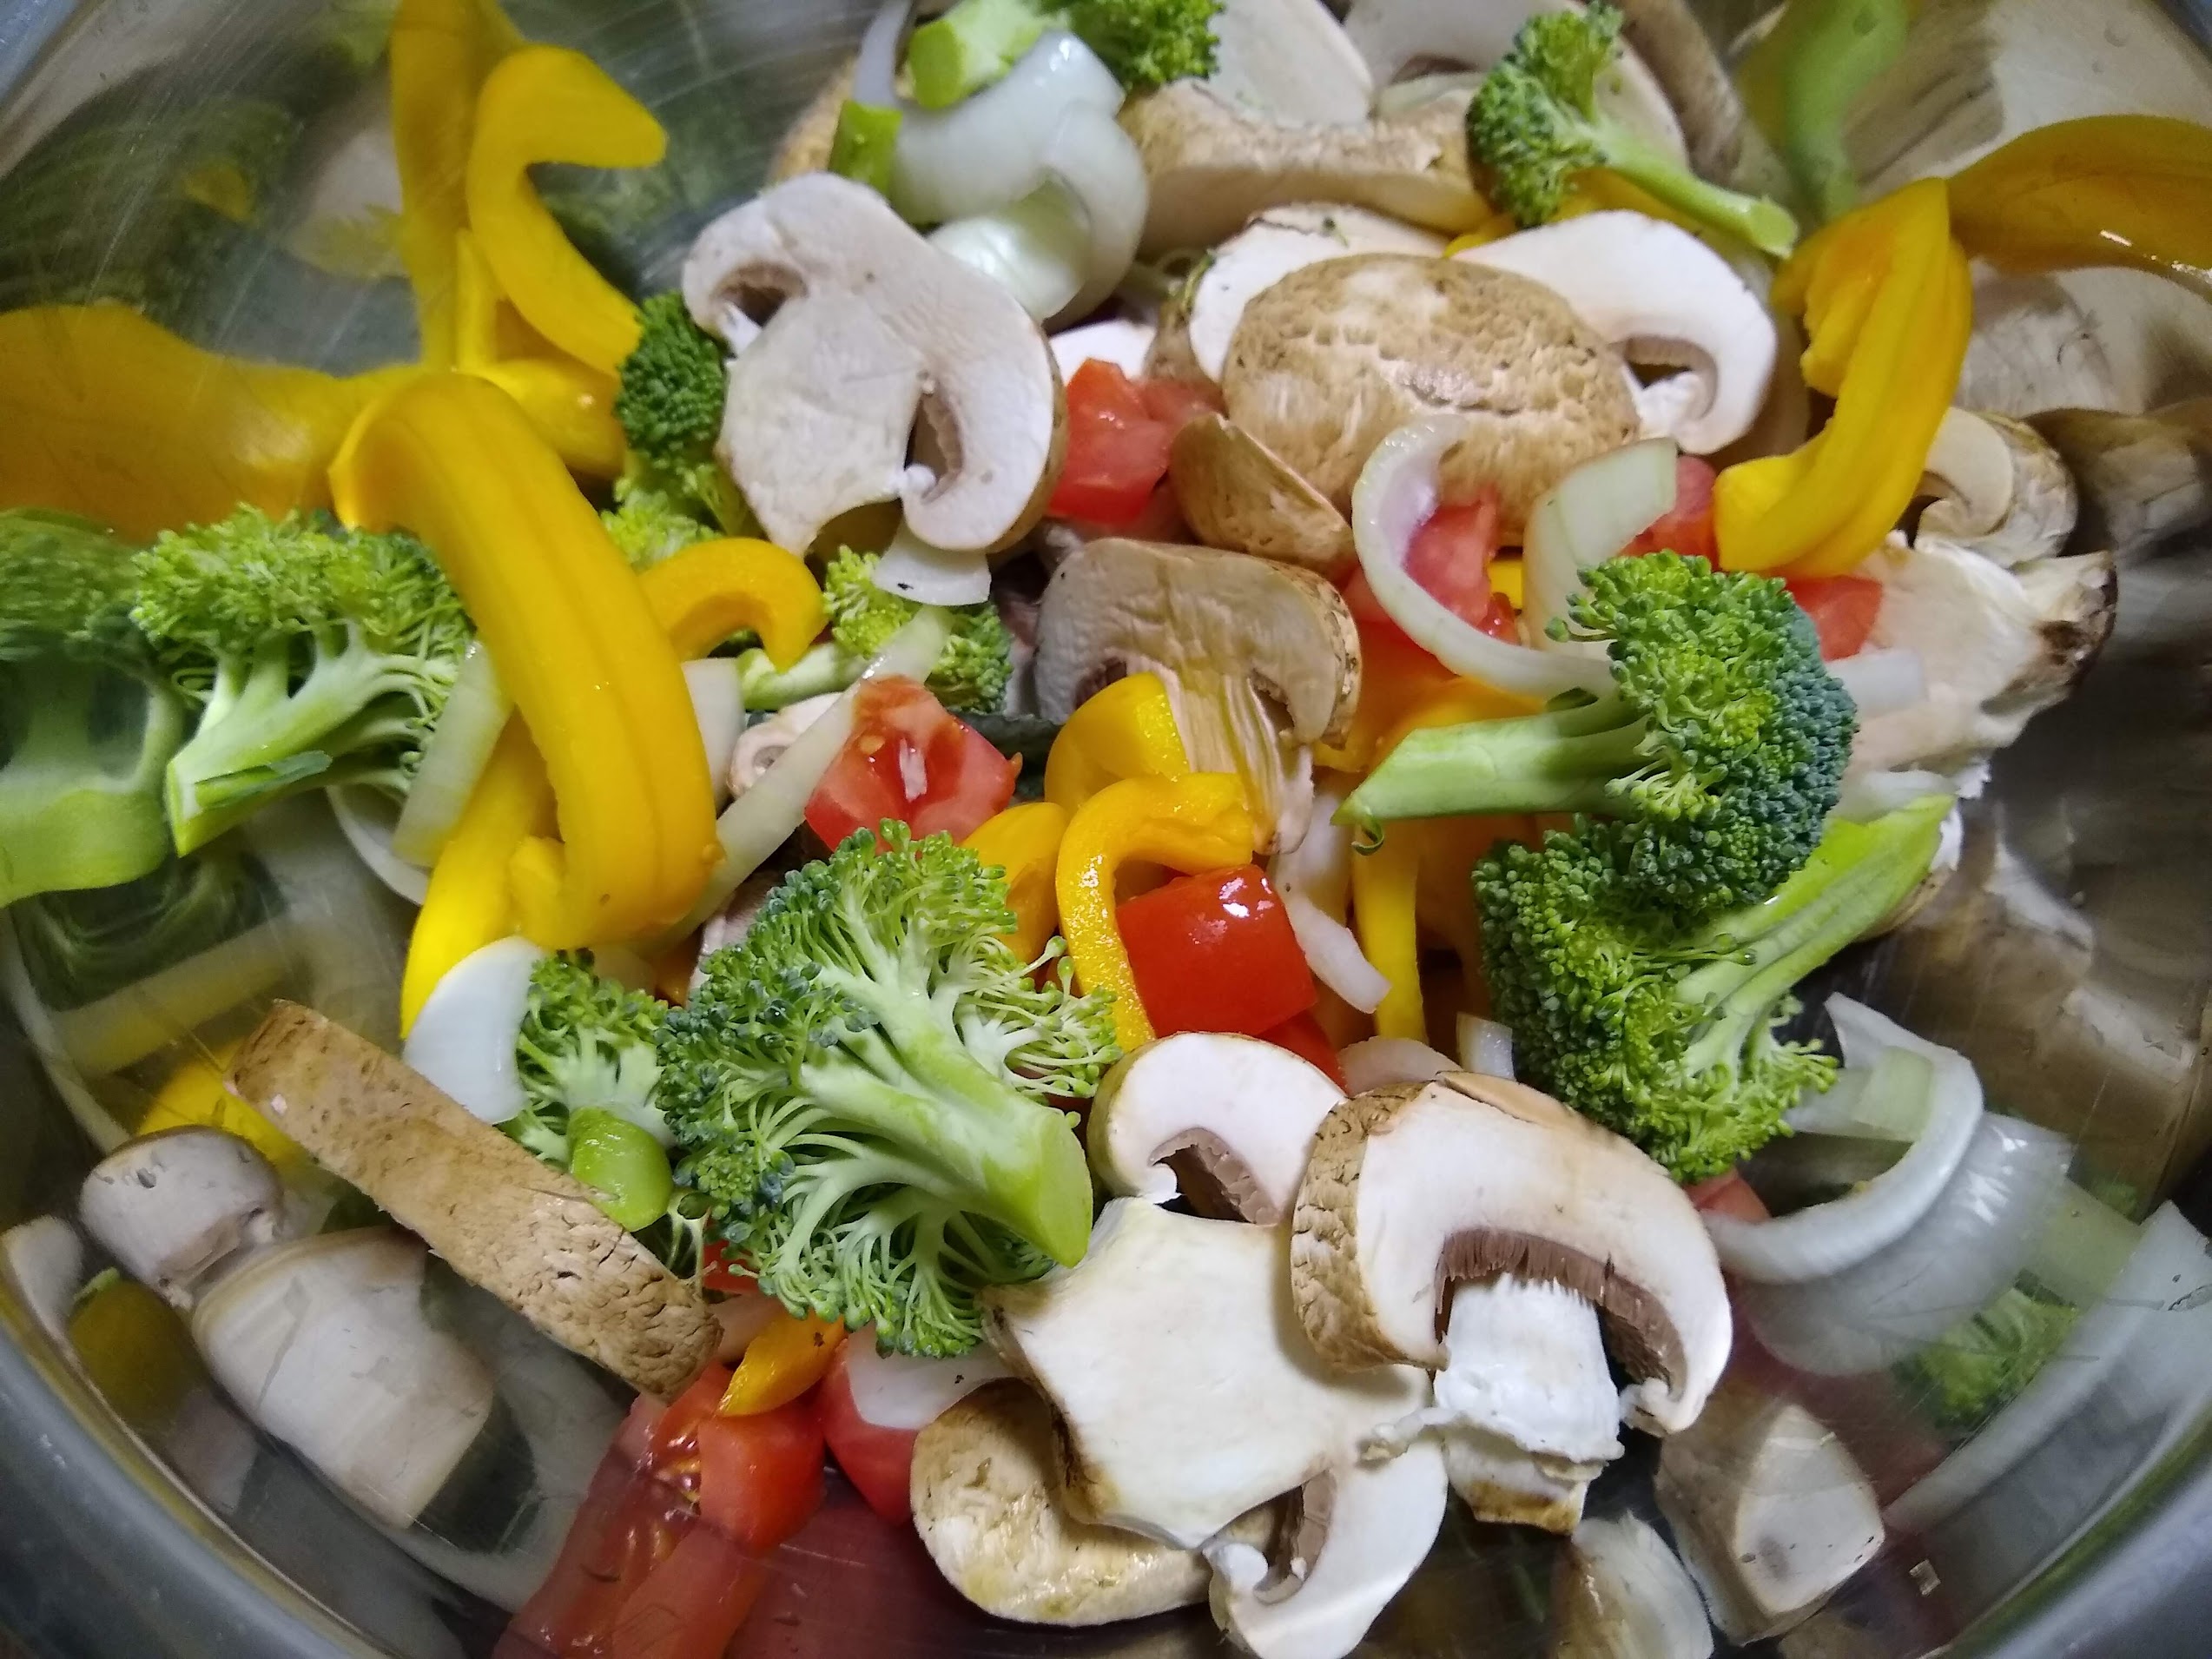 Fresh broccoli, bell peppers, mushrooms and onions